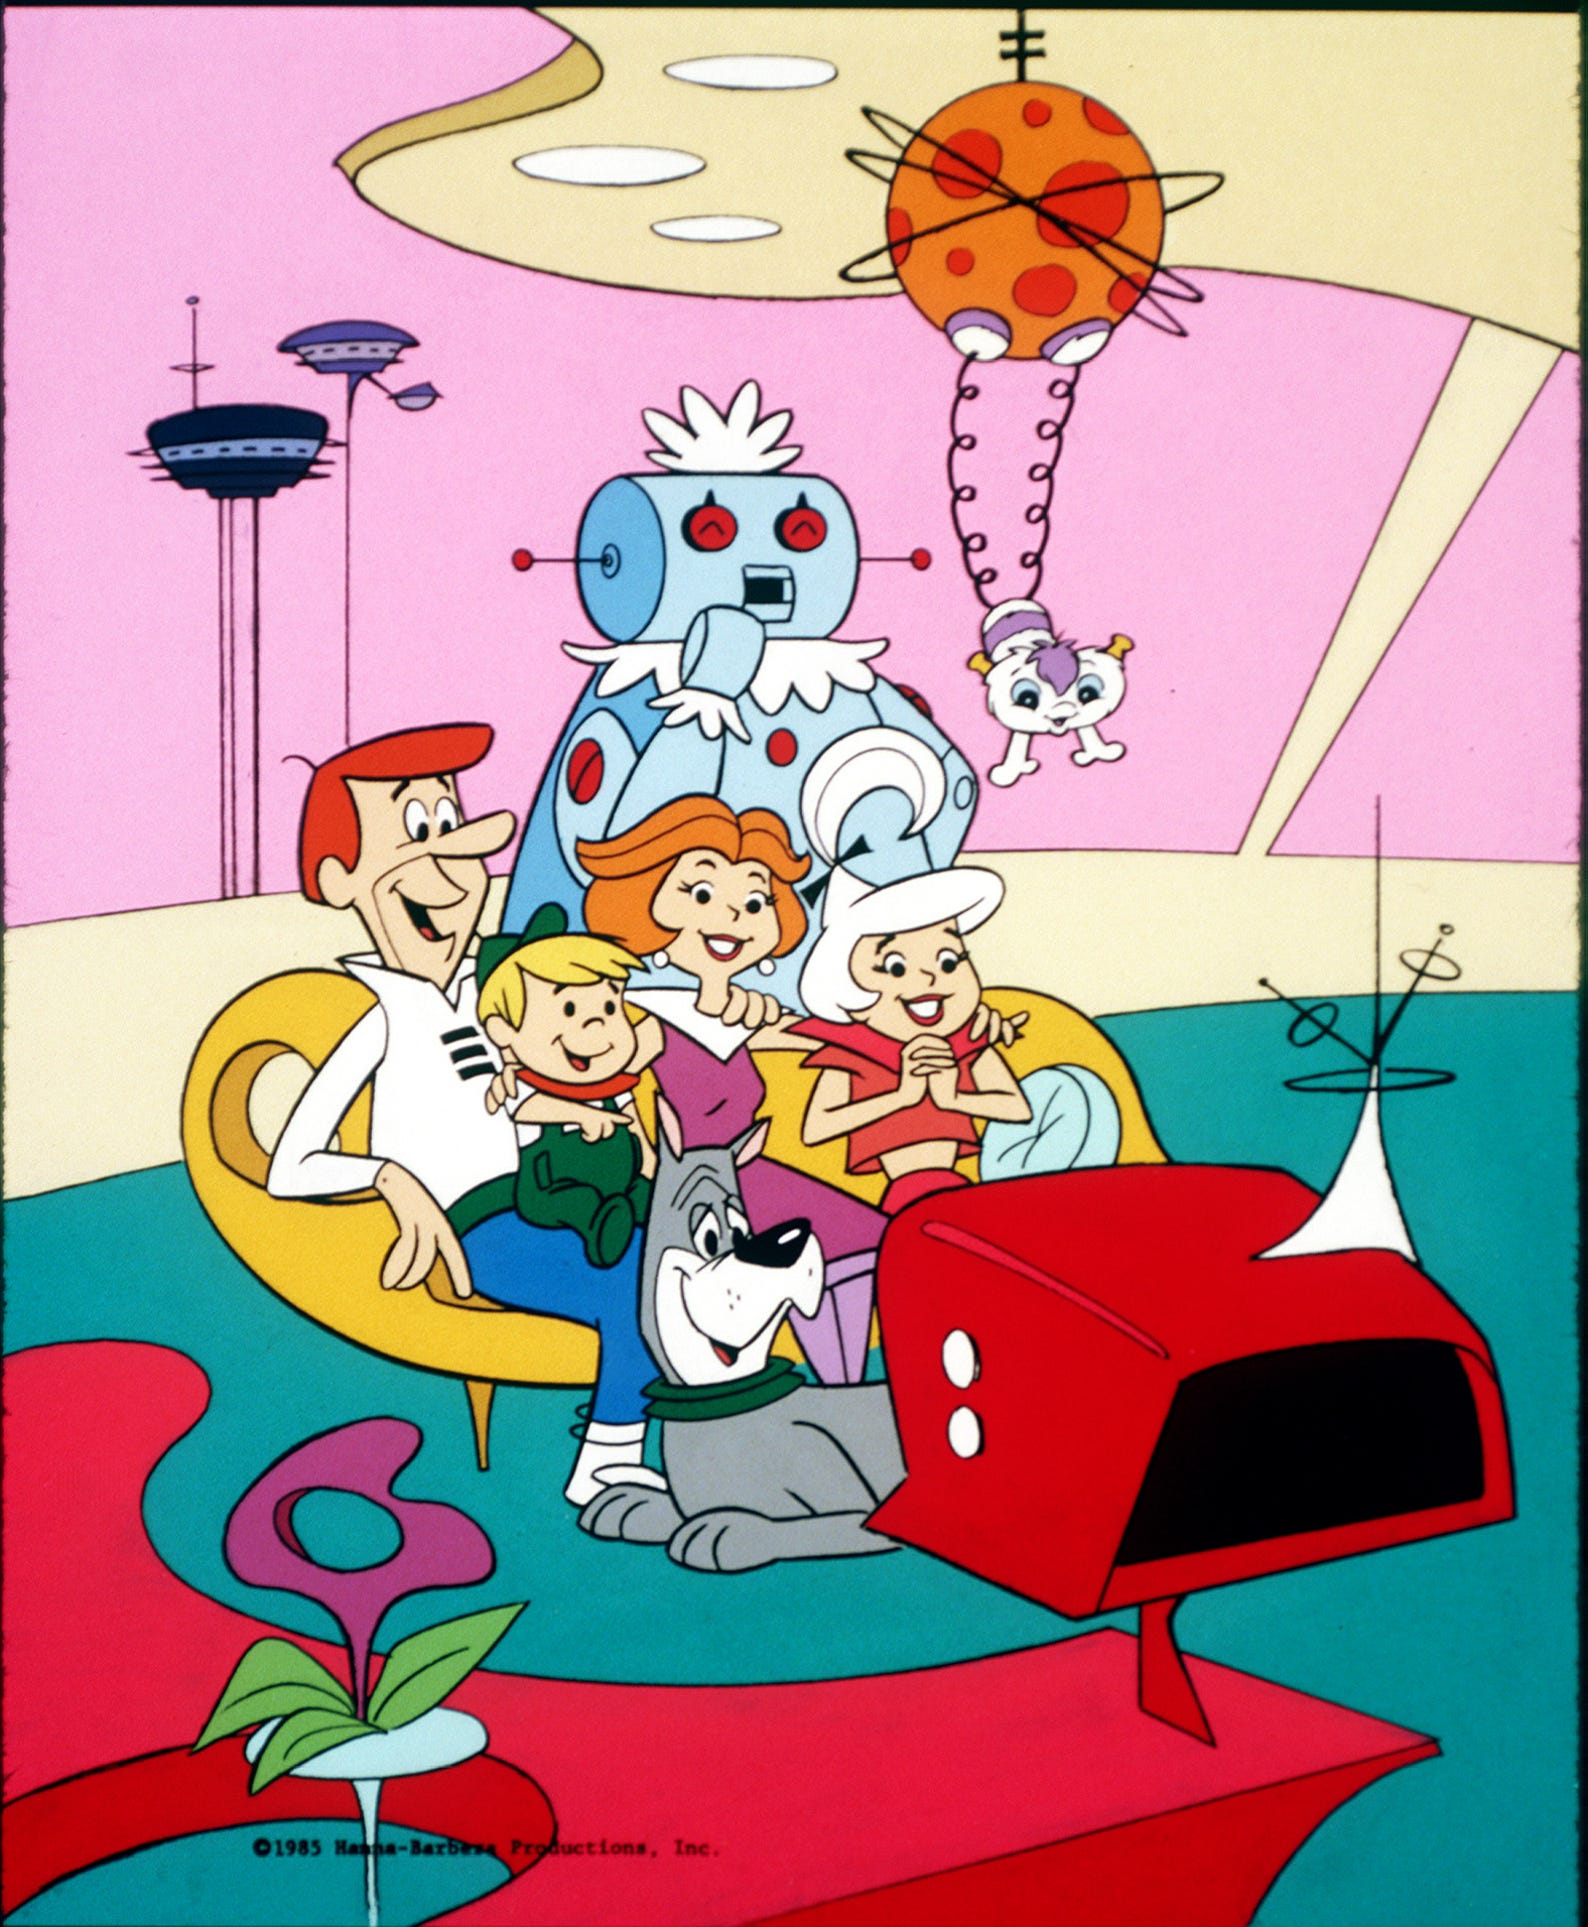 Elmo Judy Jetson Porn - best adult animated series of all time